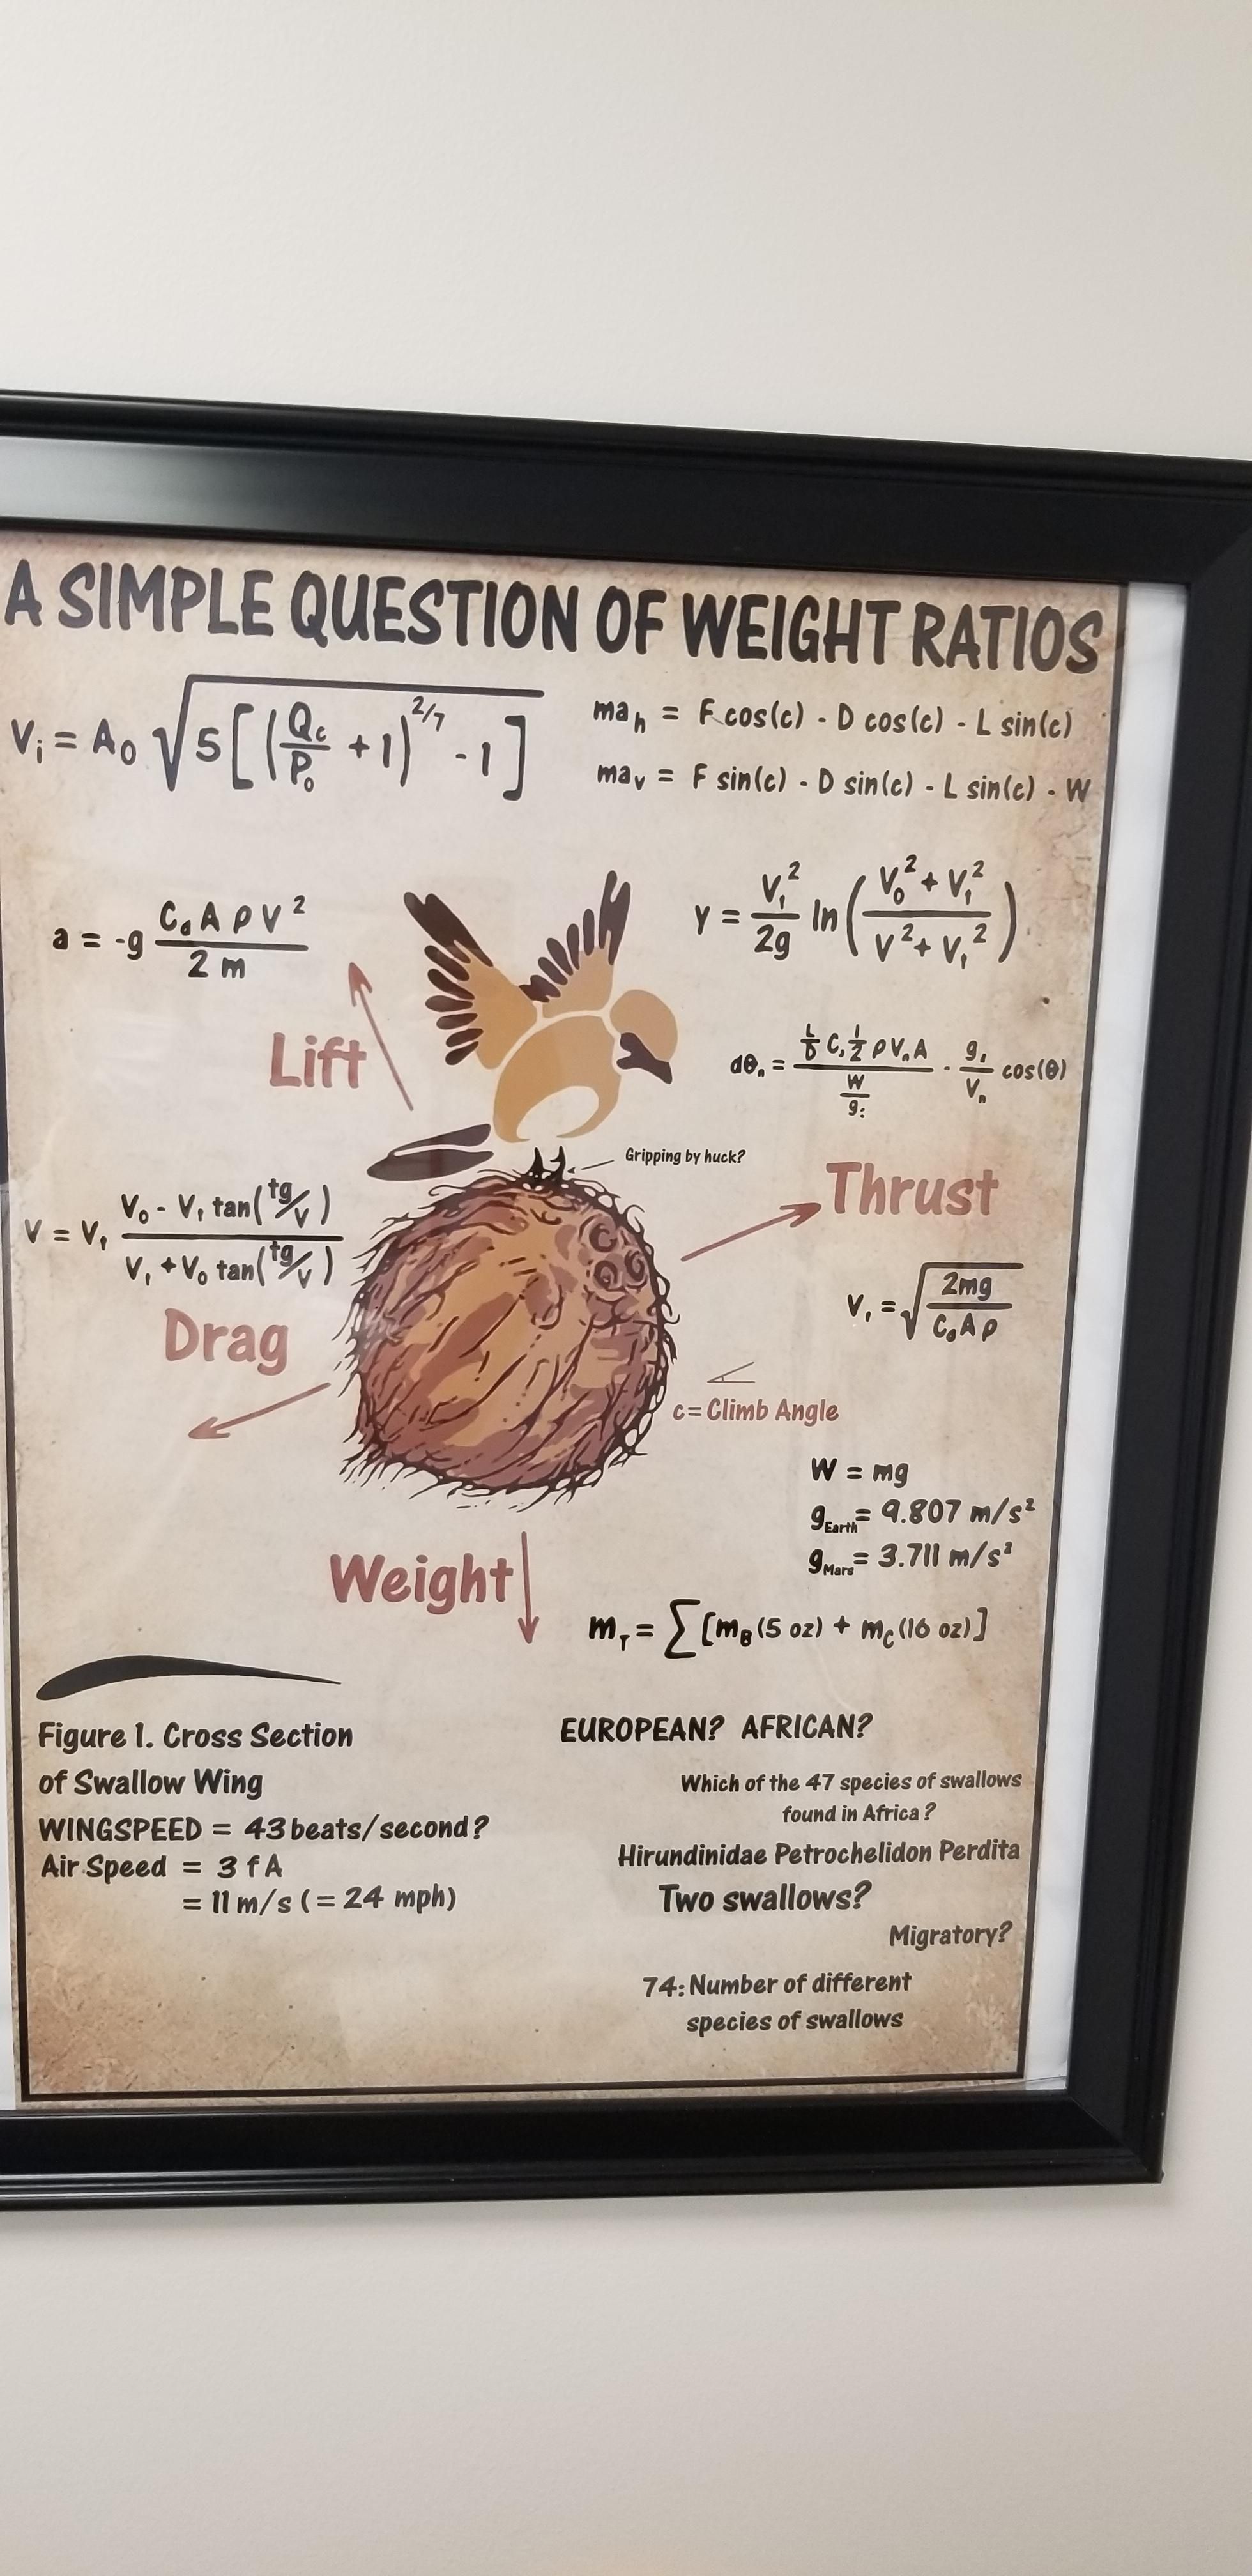 Waiting for the doctor and spotted this on the wall.